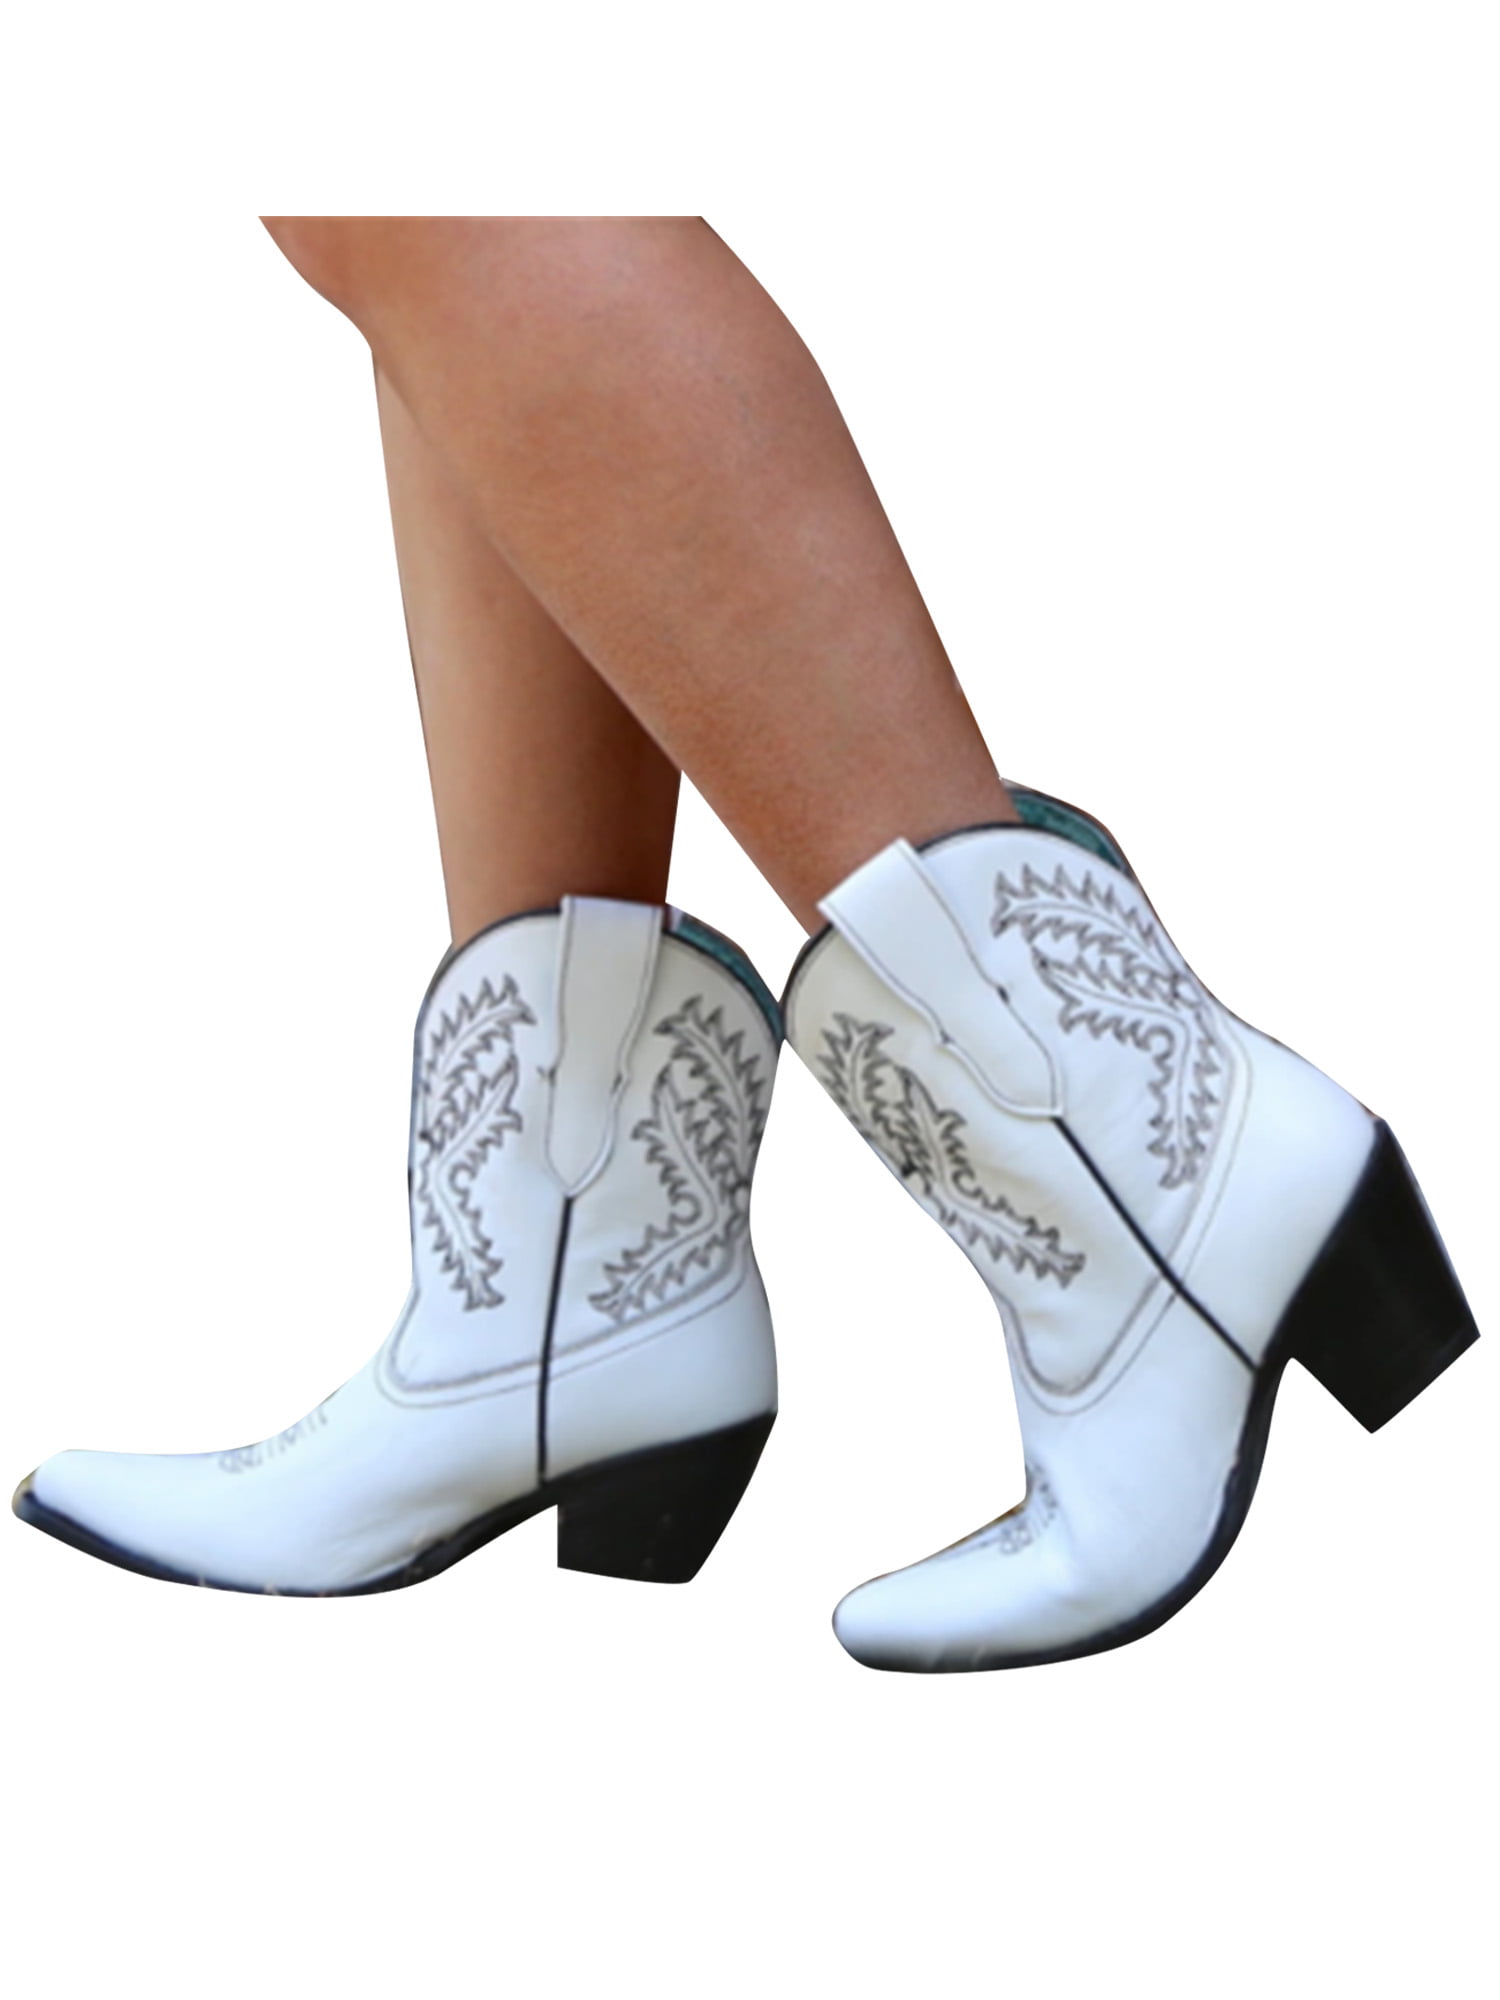 Classic Ladies Western Pattern Cowboy Cowgirl Pull On Block Heel Pointed Boots 